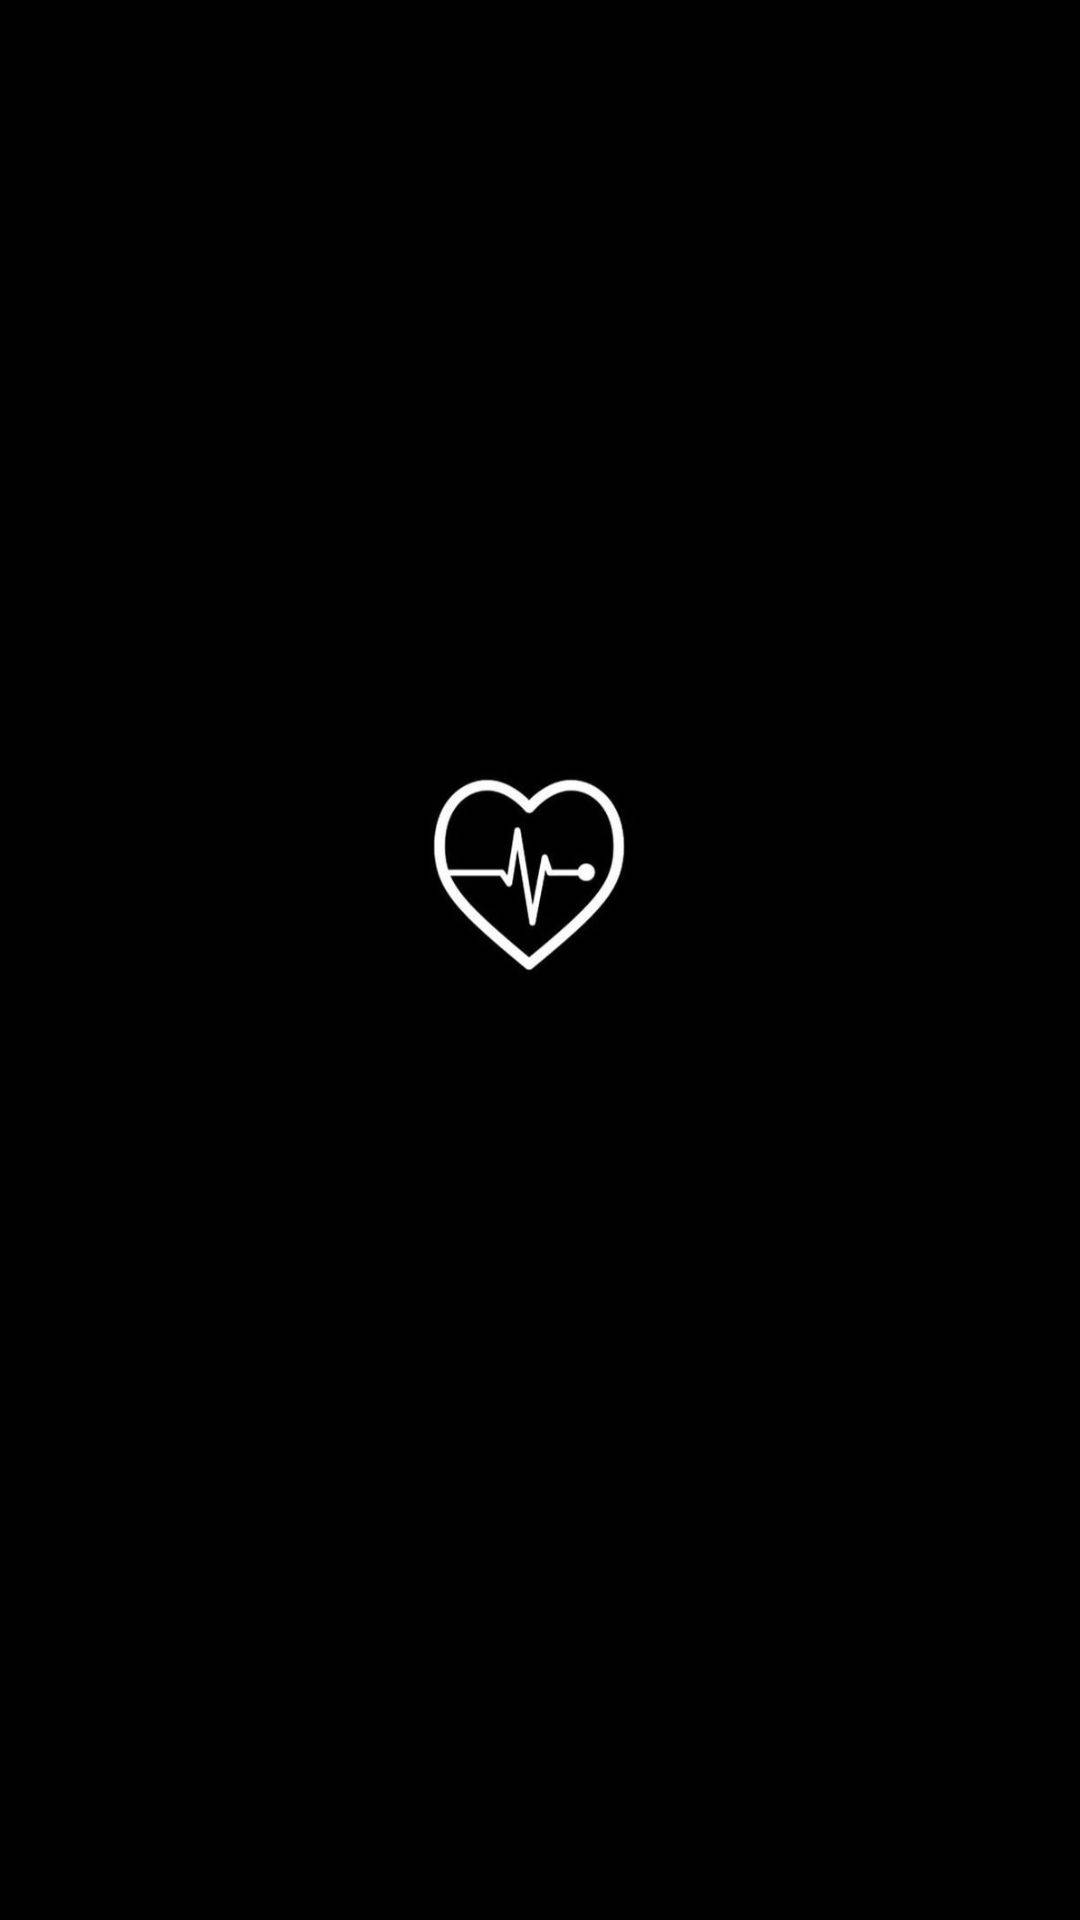 Black Heart With Heartbeat Background